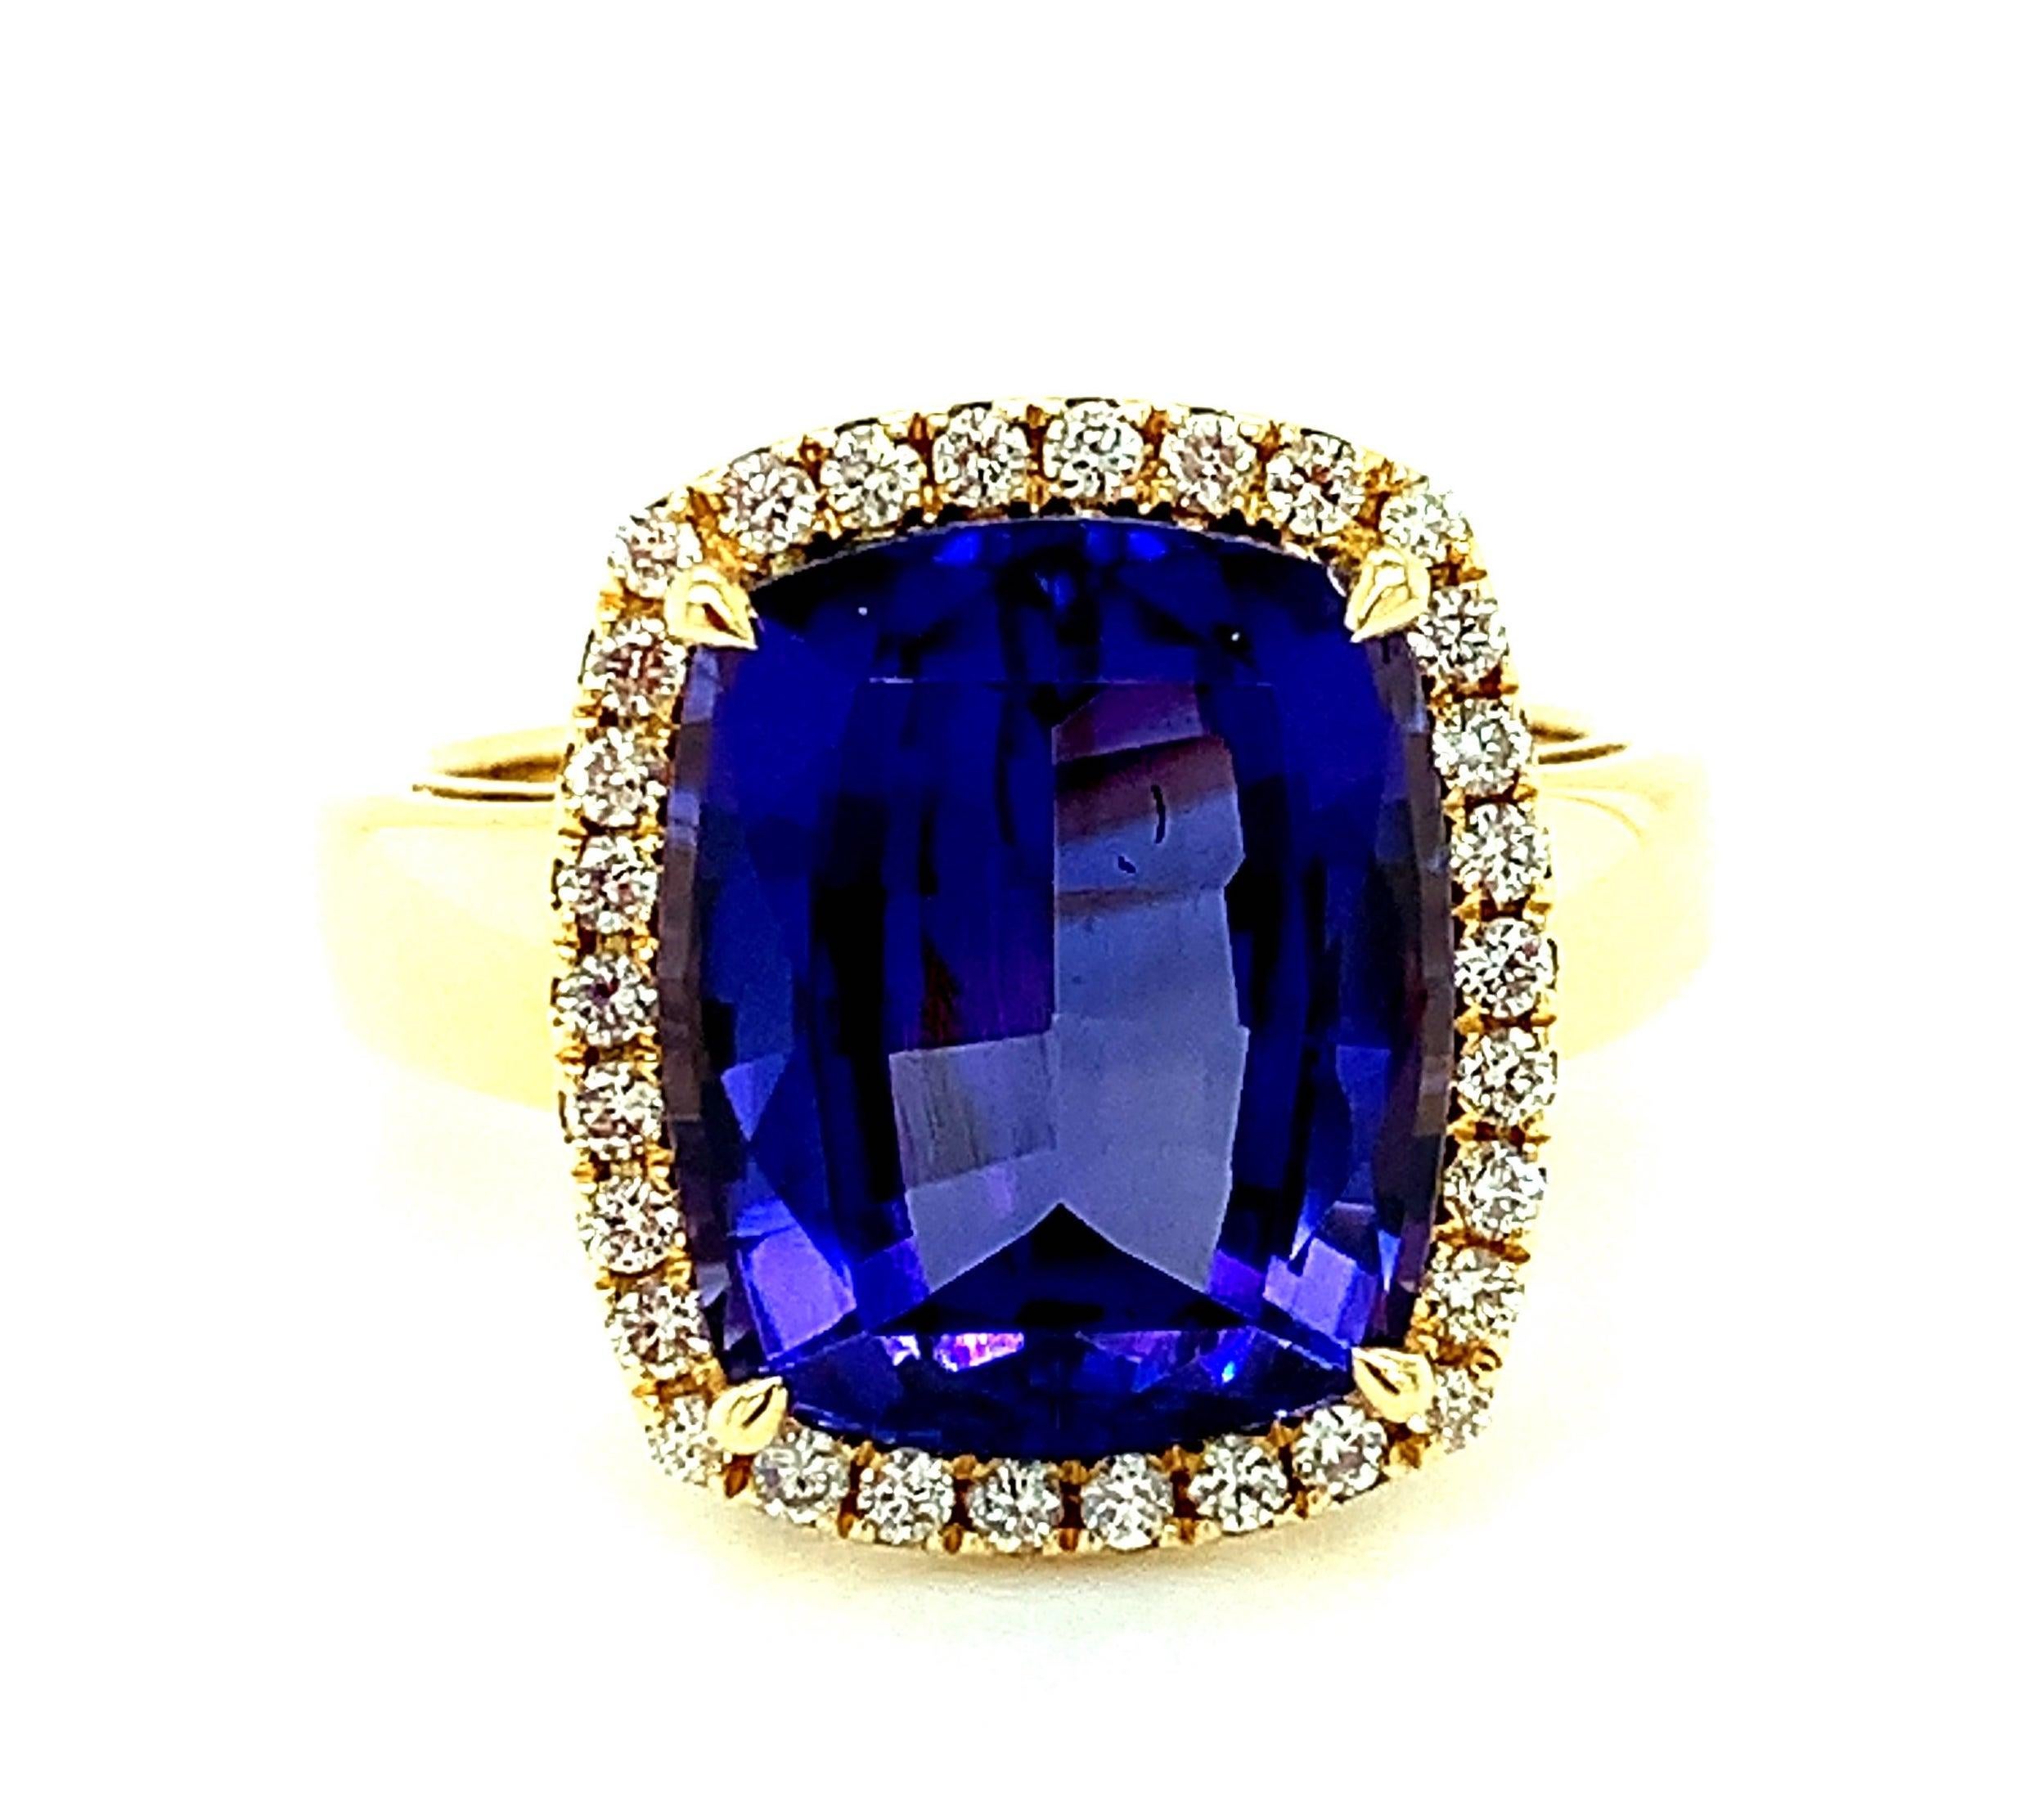 This stunning, quintessential cocktail ring features a spectacular gem-quality tanzanite with intense, violet blue color. The tanzanite is cushion shaped and weighs an impressive 7.70 carats! It is surrounded by a halo of sparkling, brilliant cut